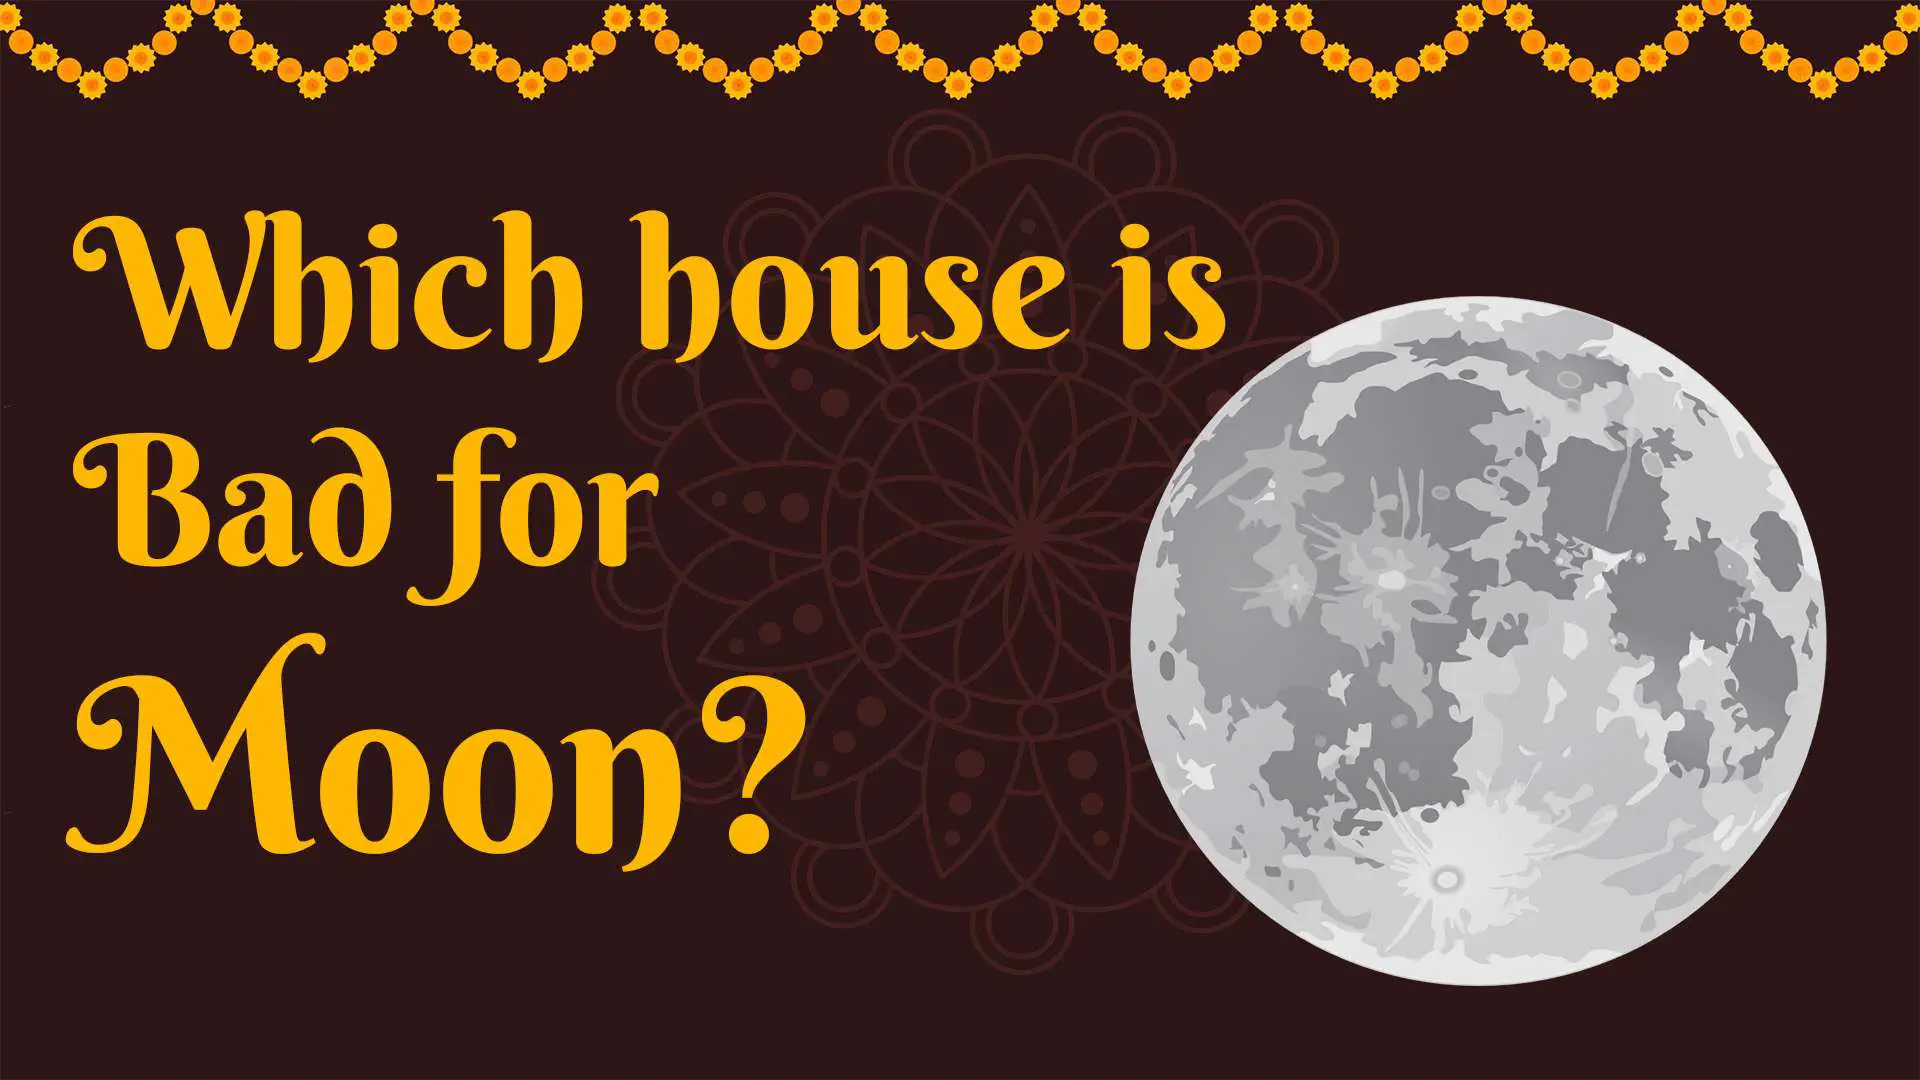 Which houses are bad for Moon?